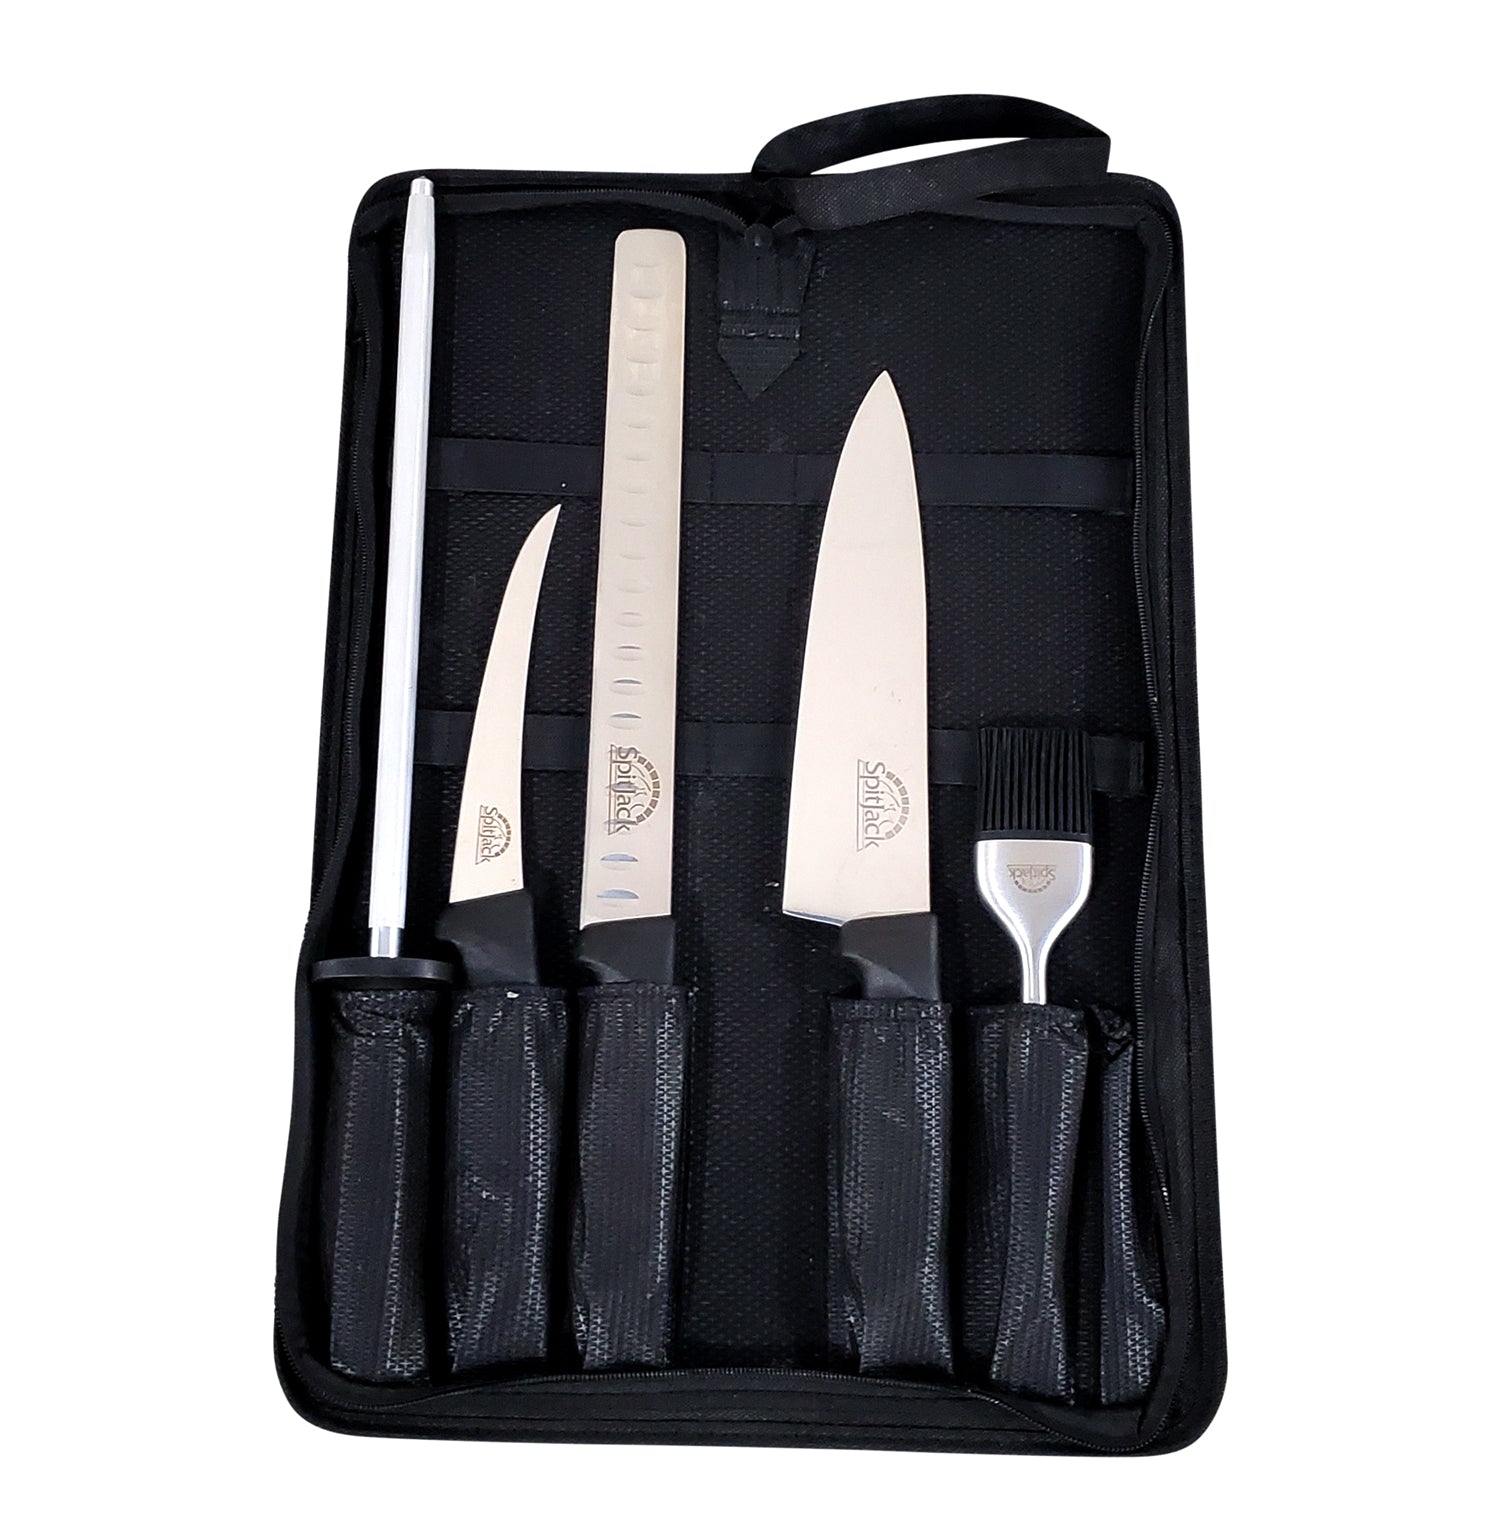 Umite Chef 48-Piece Silverware Set with Steak Knives India